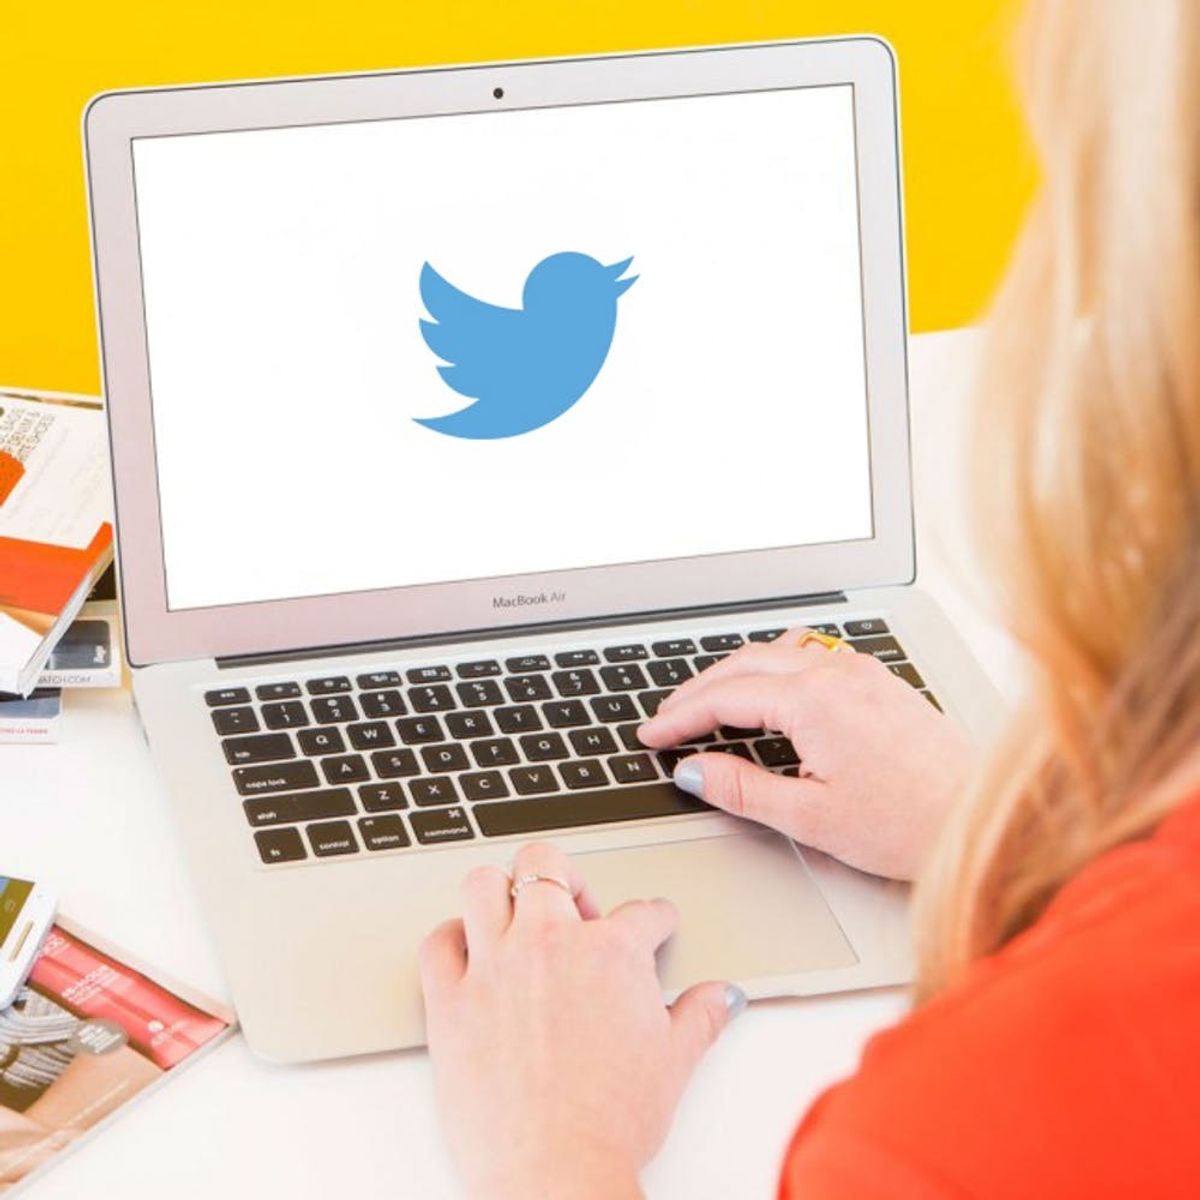 10 Twitter Conversations You Should Be Following